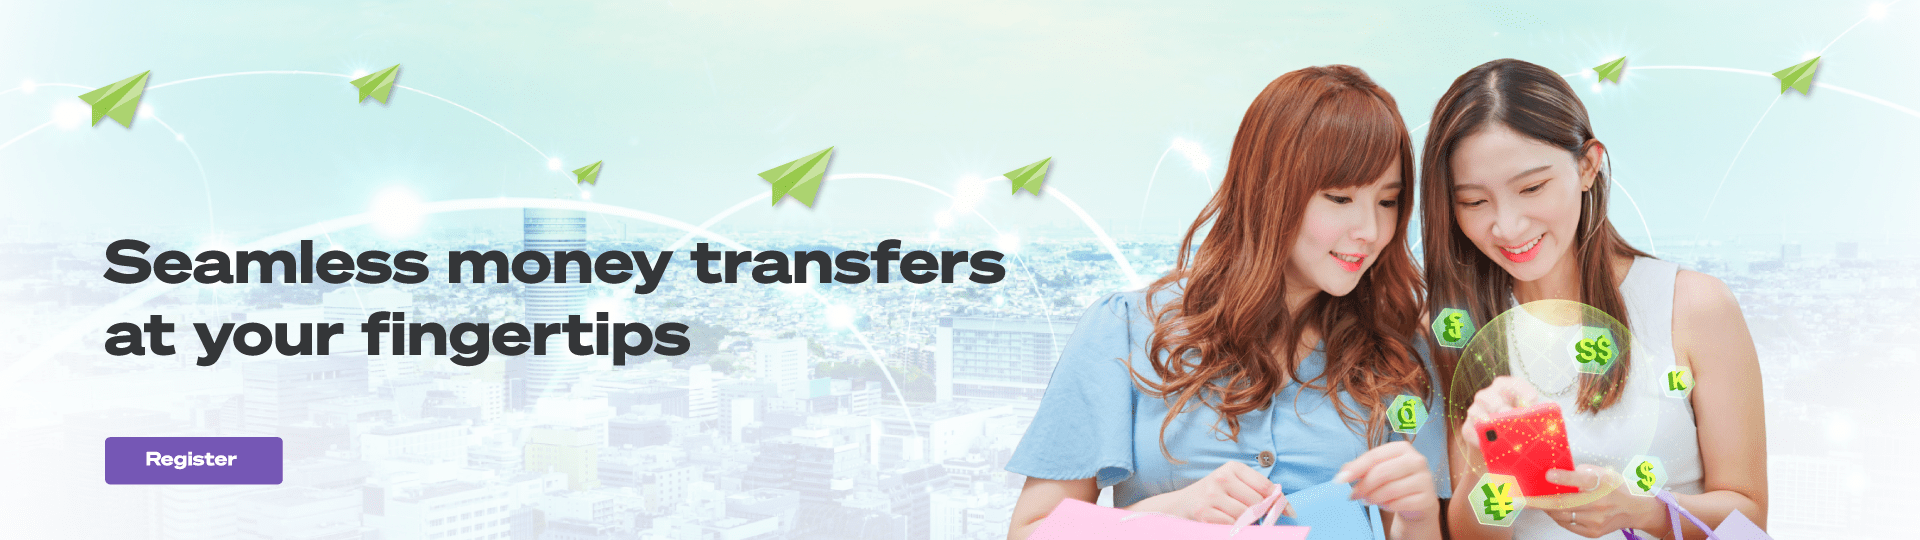 Seamless money transfers at your fingertips